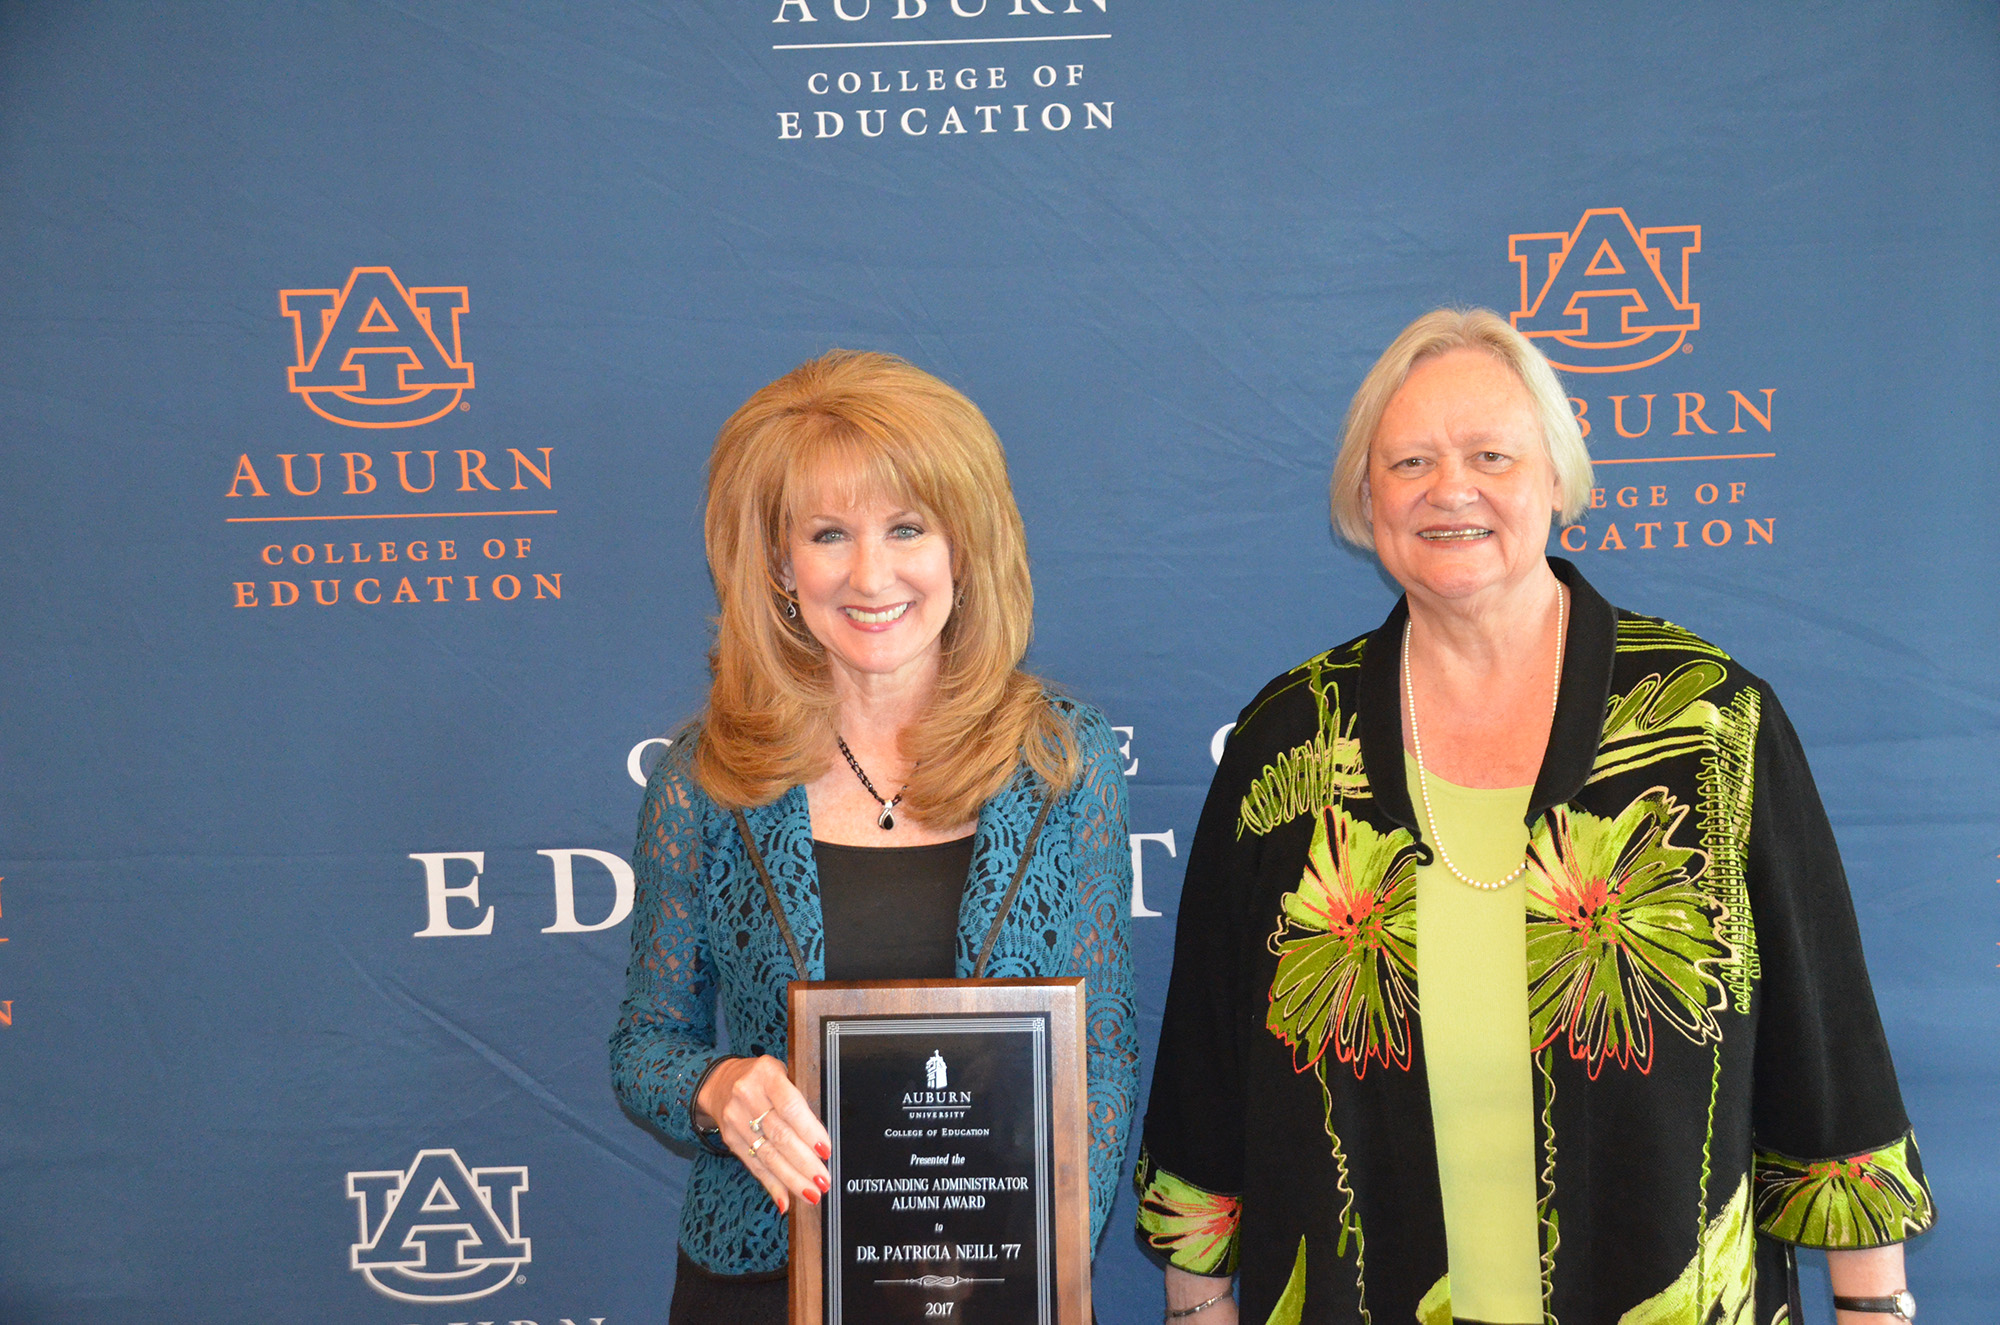 TCS Supt. Pattie Neill named outstanding administrator by Auburn University